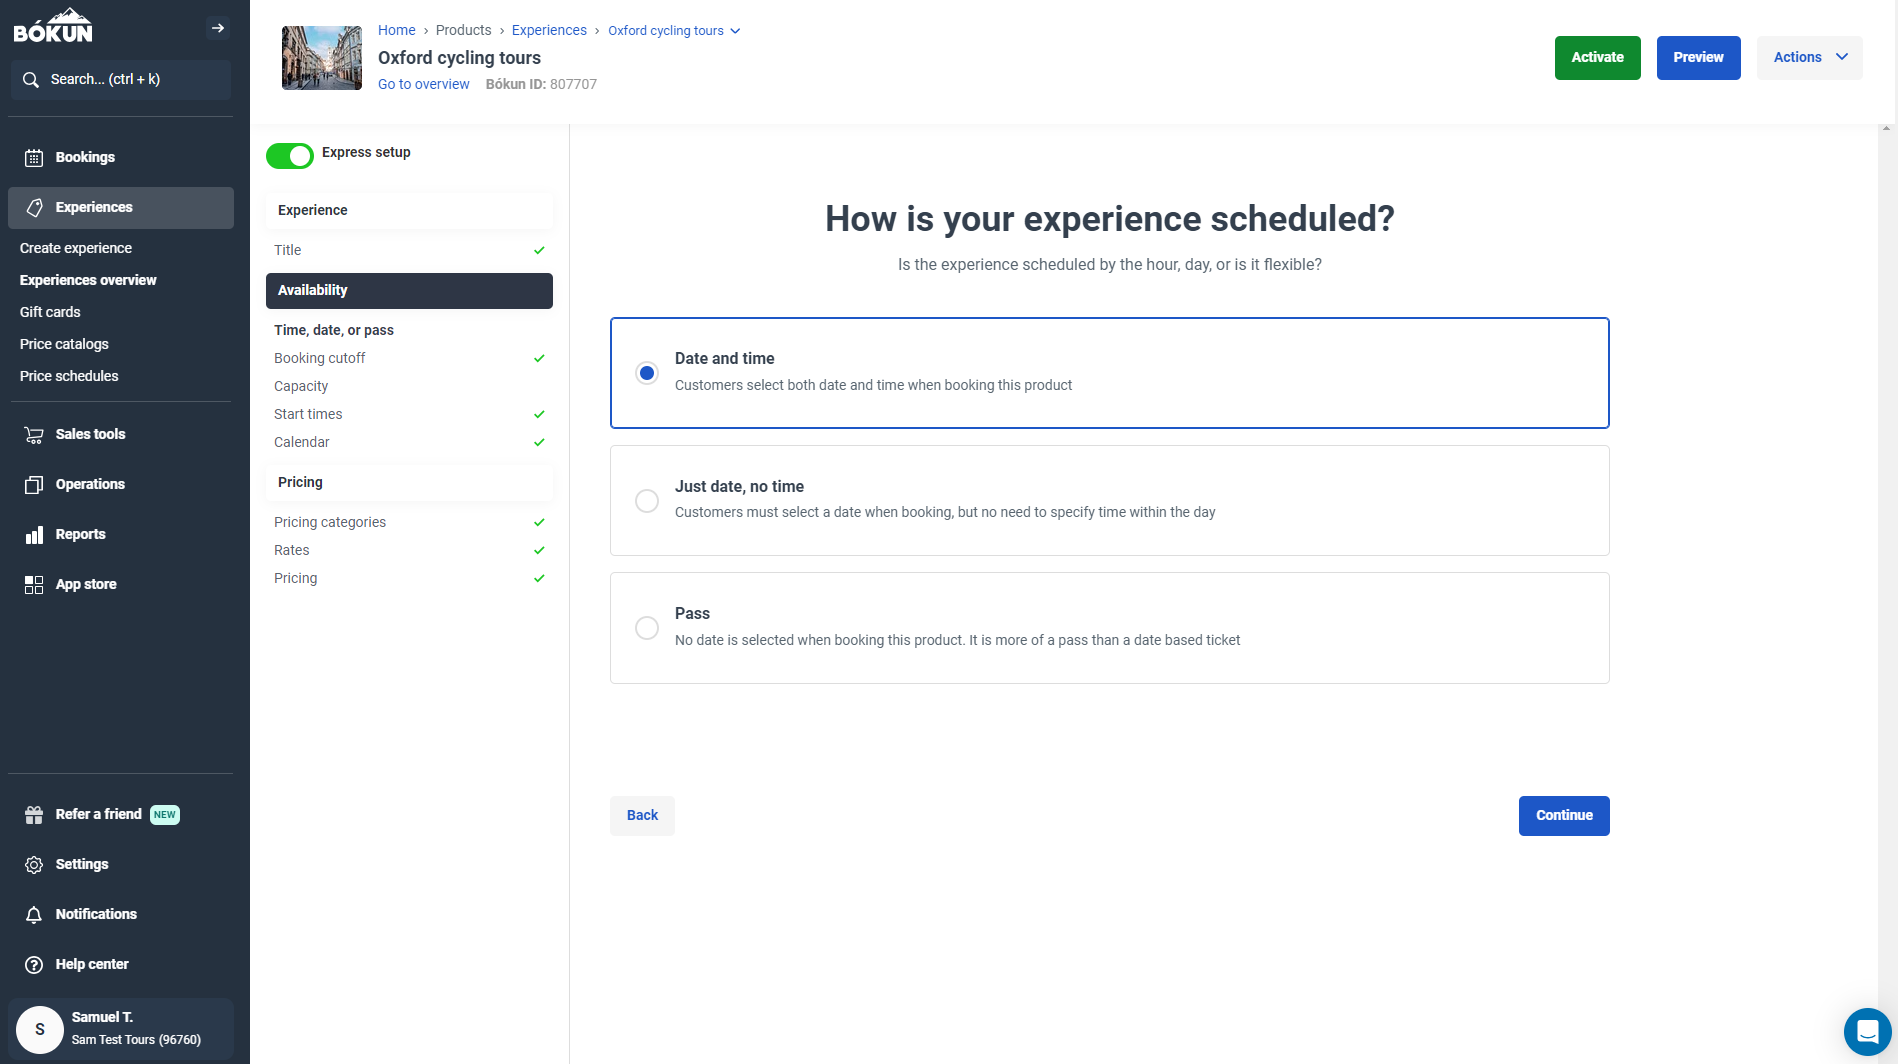 How is your experience scheduled? (Date and Time, etc.)